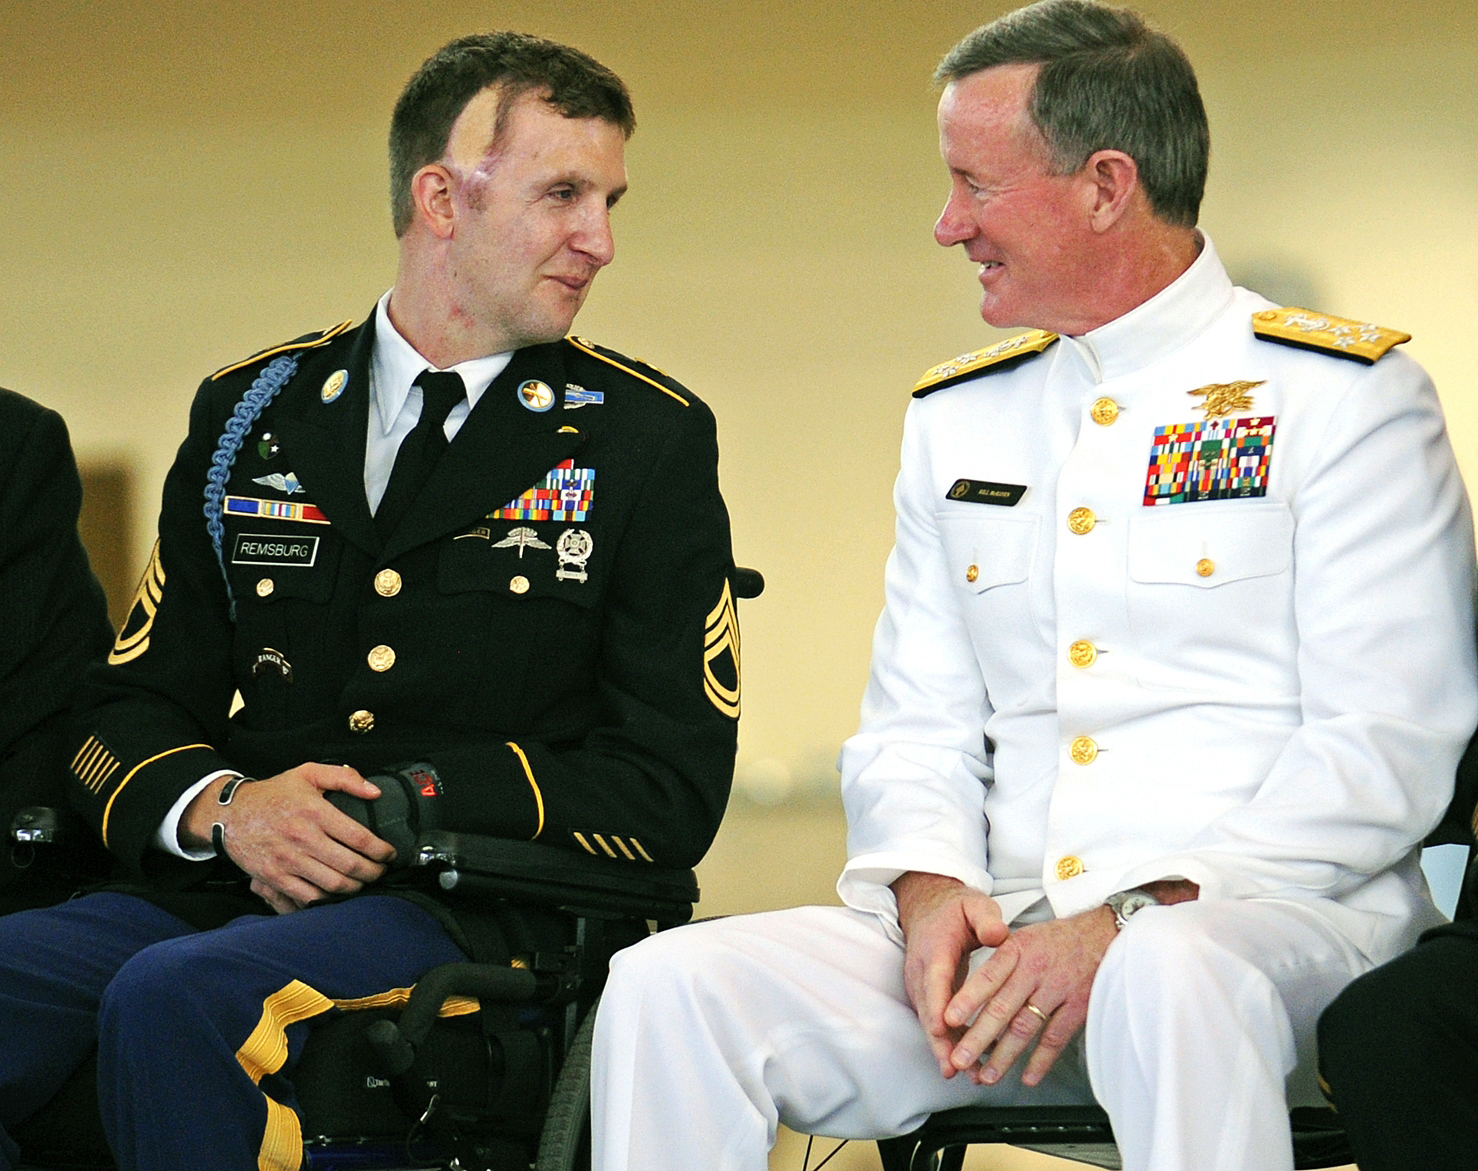 Sgt. Cory Remsburg, USA, speaks with Admiral William McRaven, during Remsburg's 2014 retirement ceremony. An Army Ranger, Remsburg was severely wounded in a 2009 firefight with enemy forces in Afghanistan. He has since become a national figure who was highlighted during President Obama's 2014 State of the Union Address. (AP Photo/Savannah Morning News, Corey Dickstein)